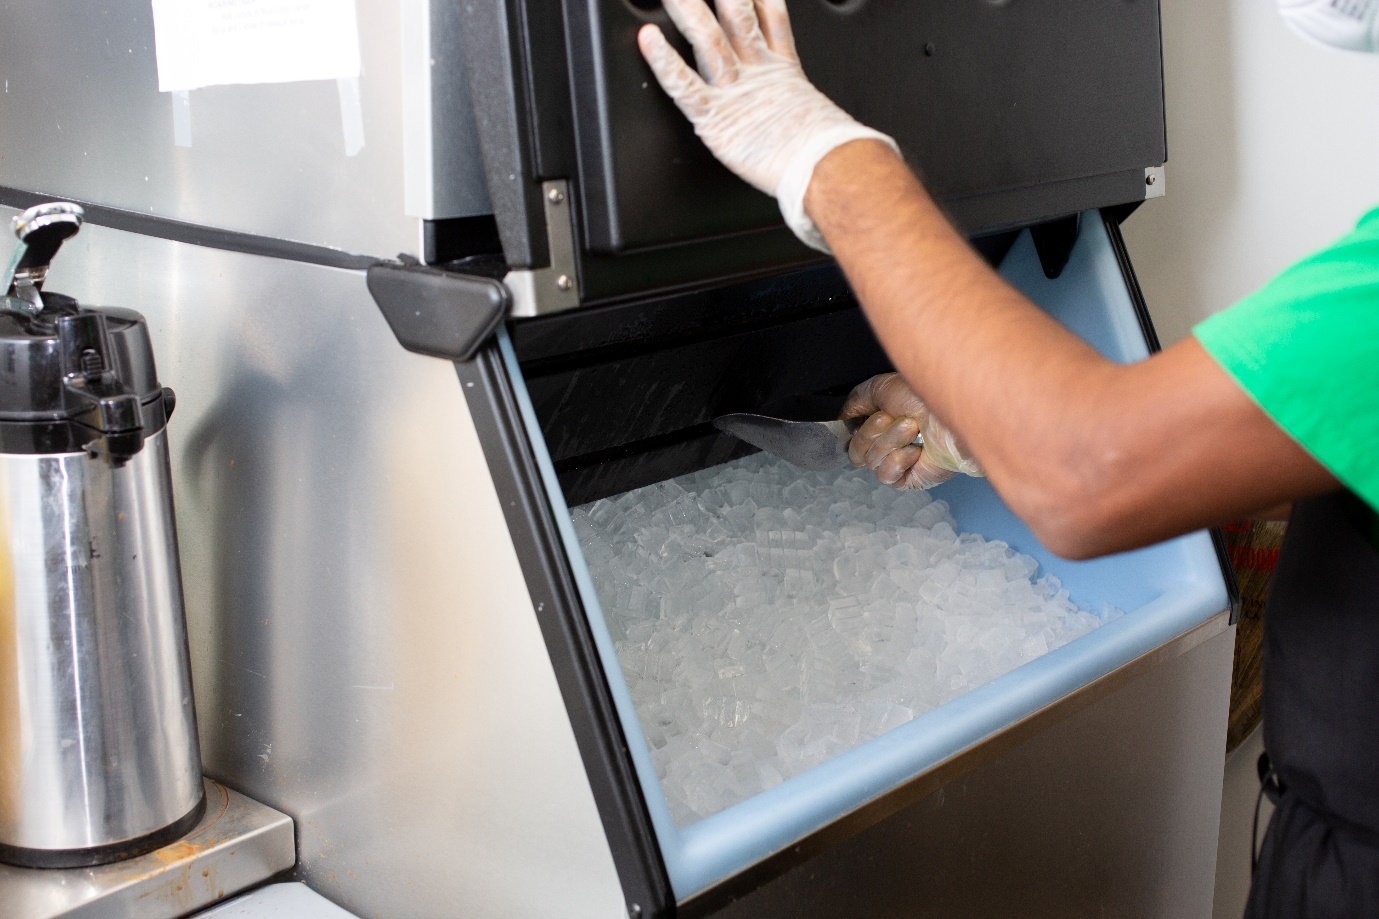 An employee scooping out ice from an ice machine